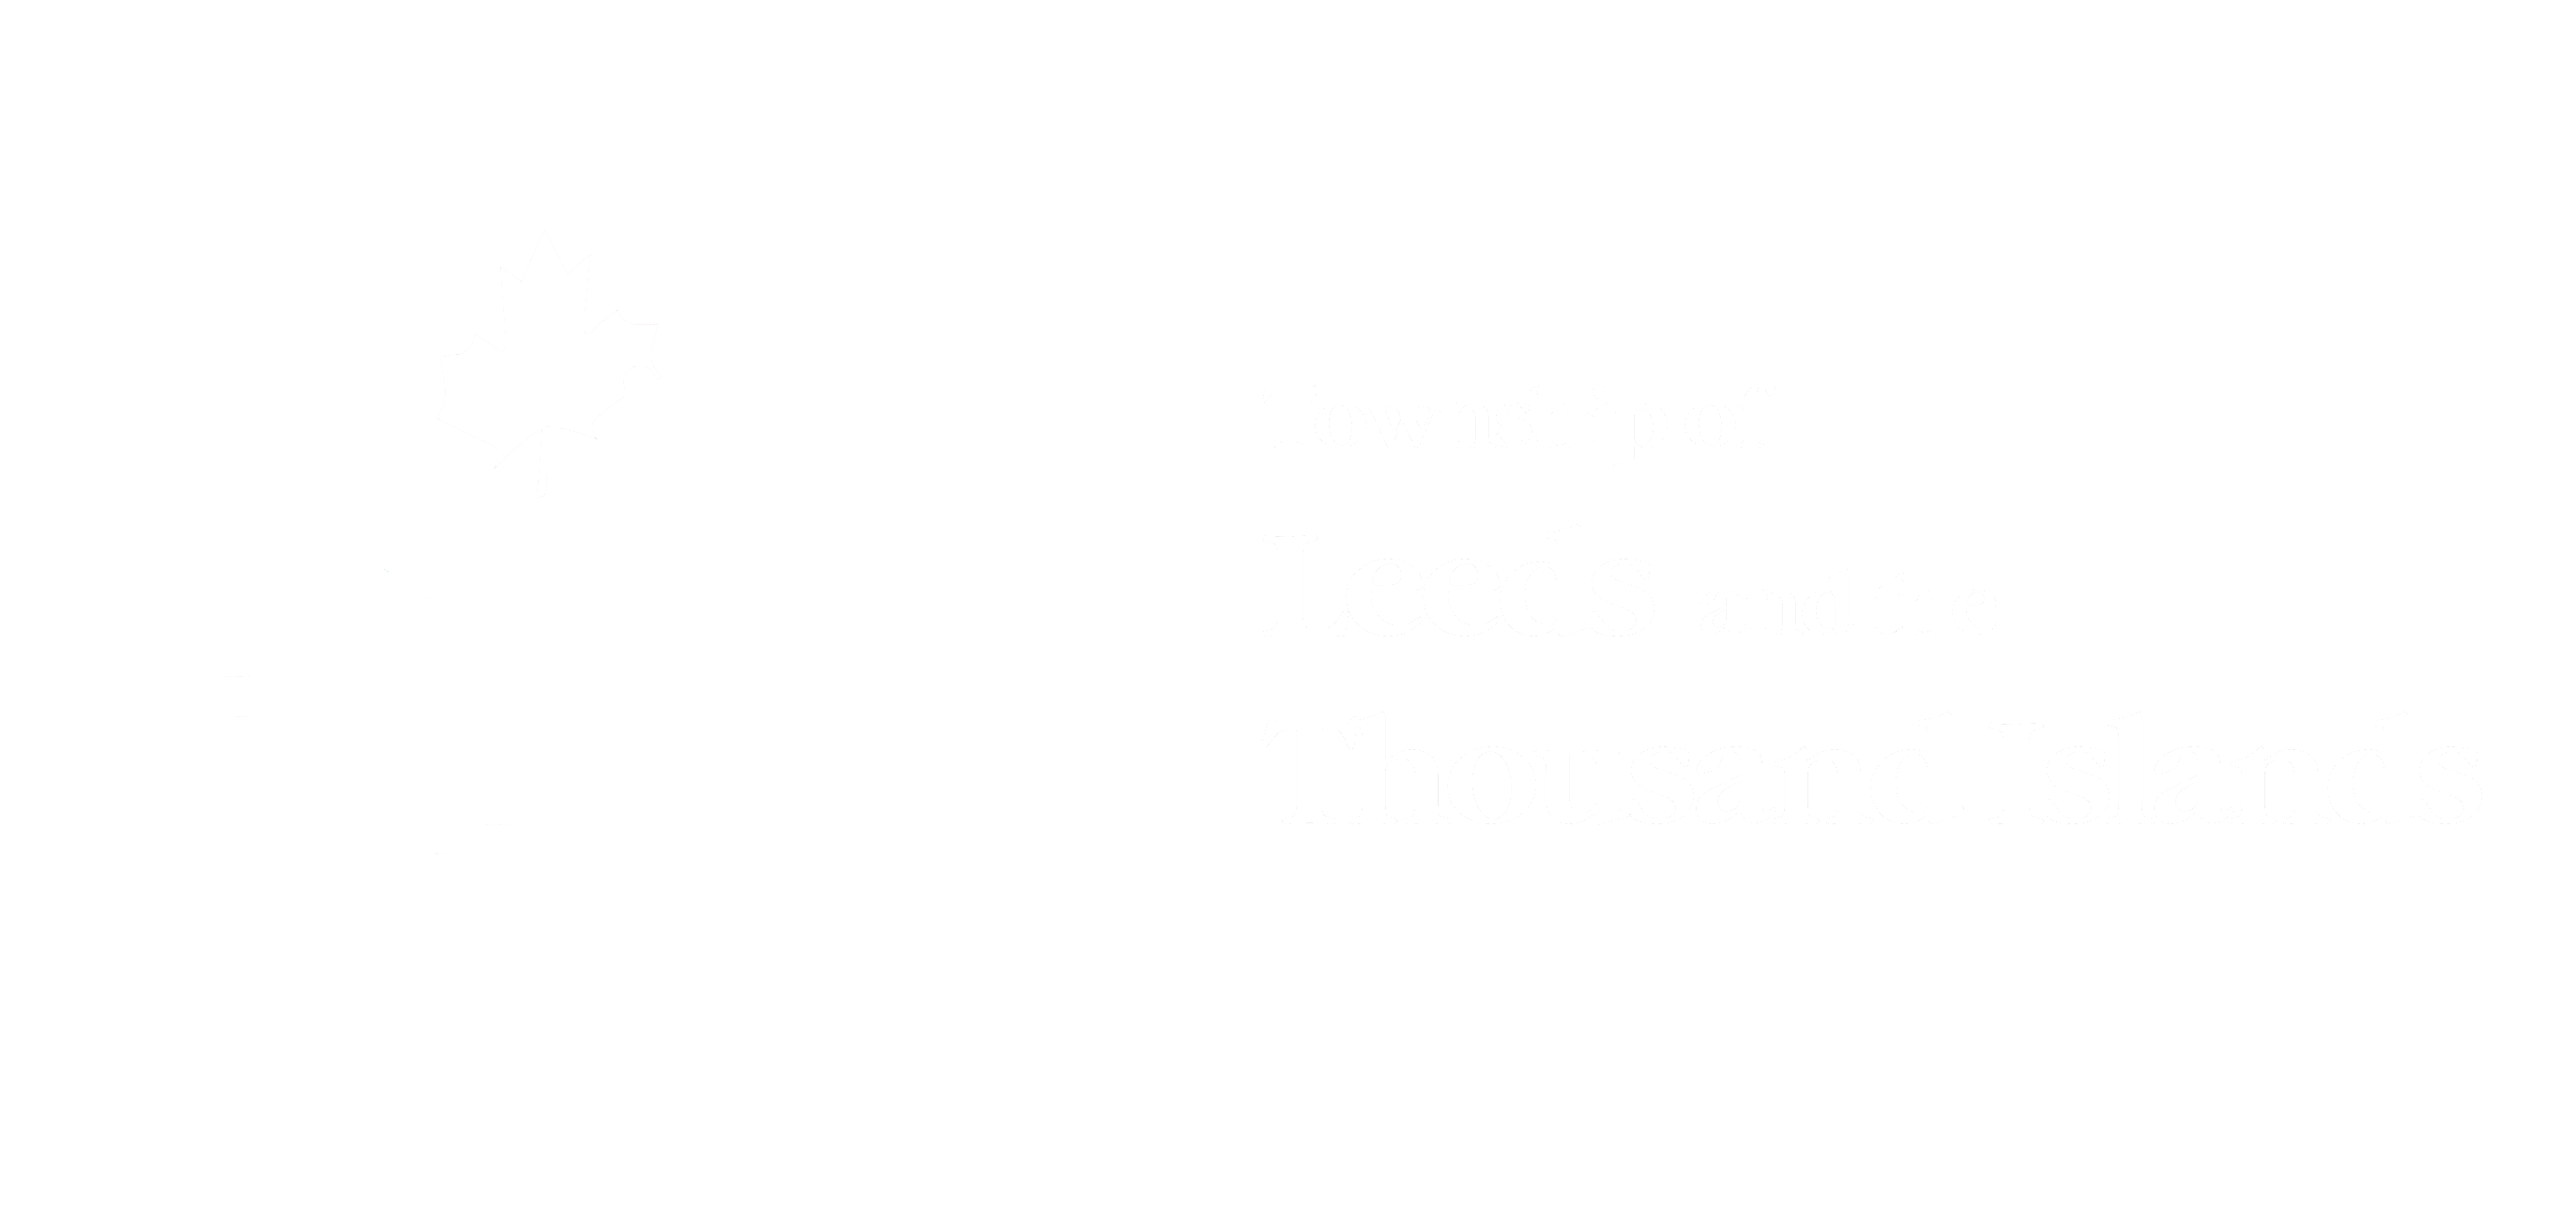 Township of Leeds and the Thousand Islands Logo